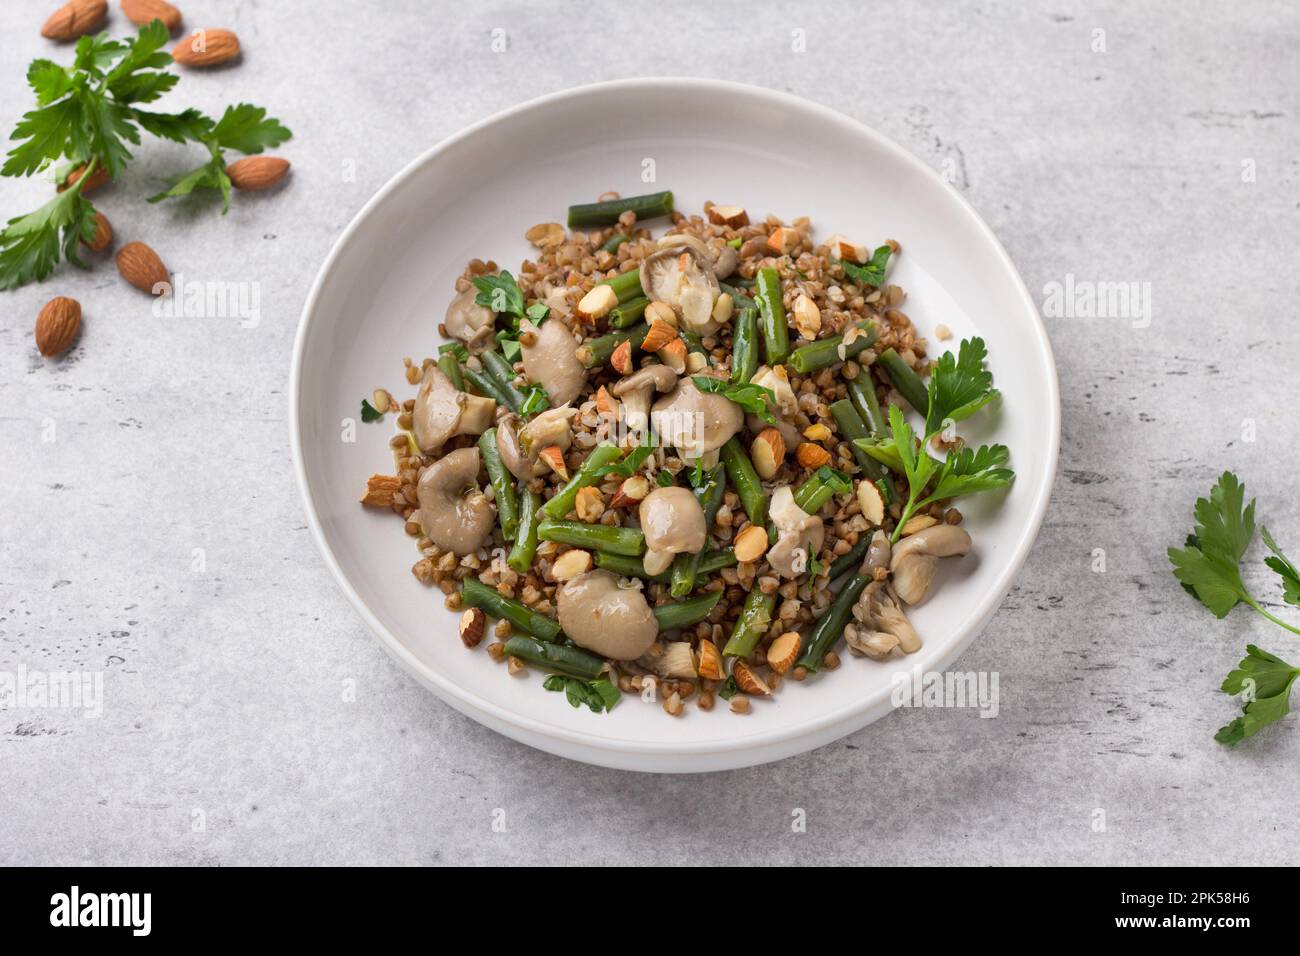 A simple steamed vegan dish. Buckwheat with green beans, oyster mushrooms, almonds and parsley, top view. Delicious healthy homemade food Stock Photo